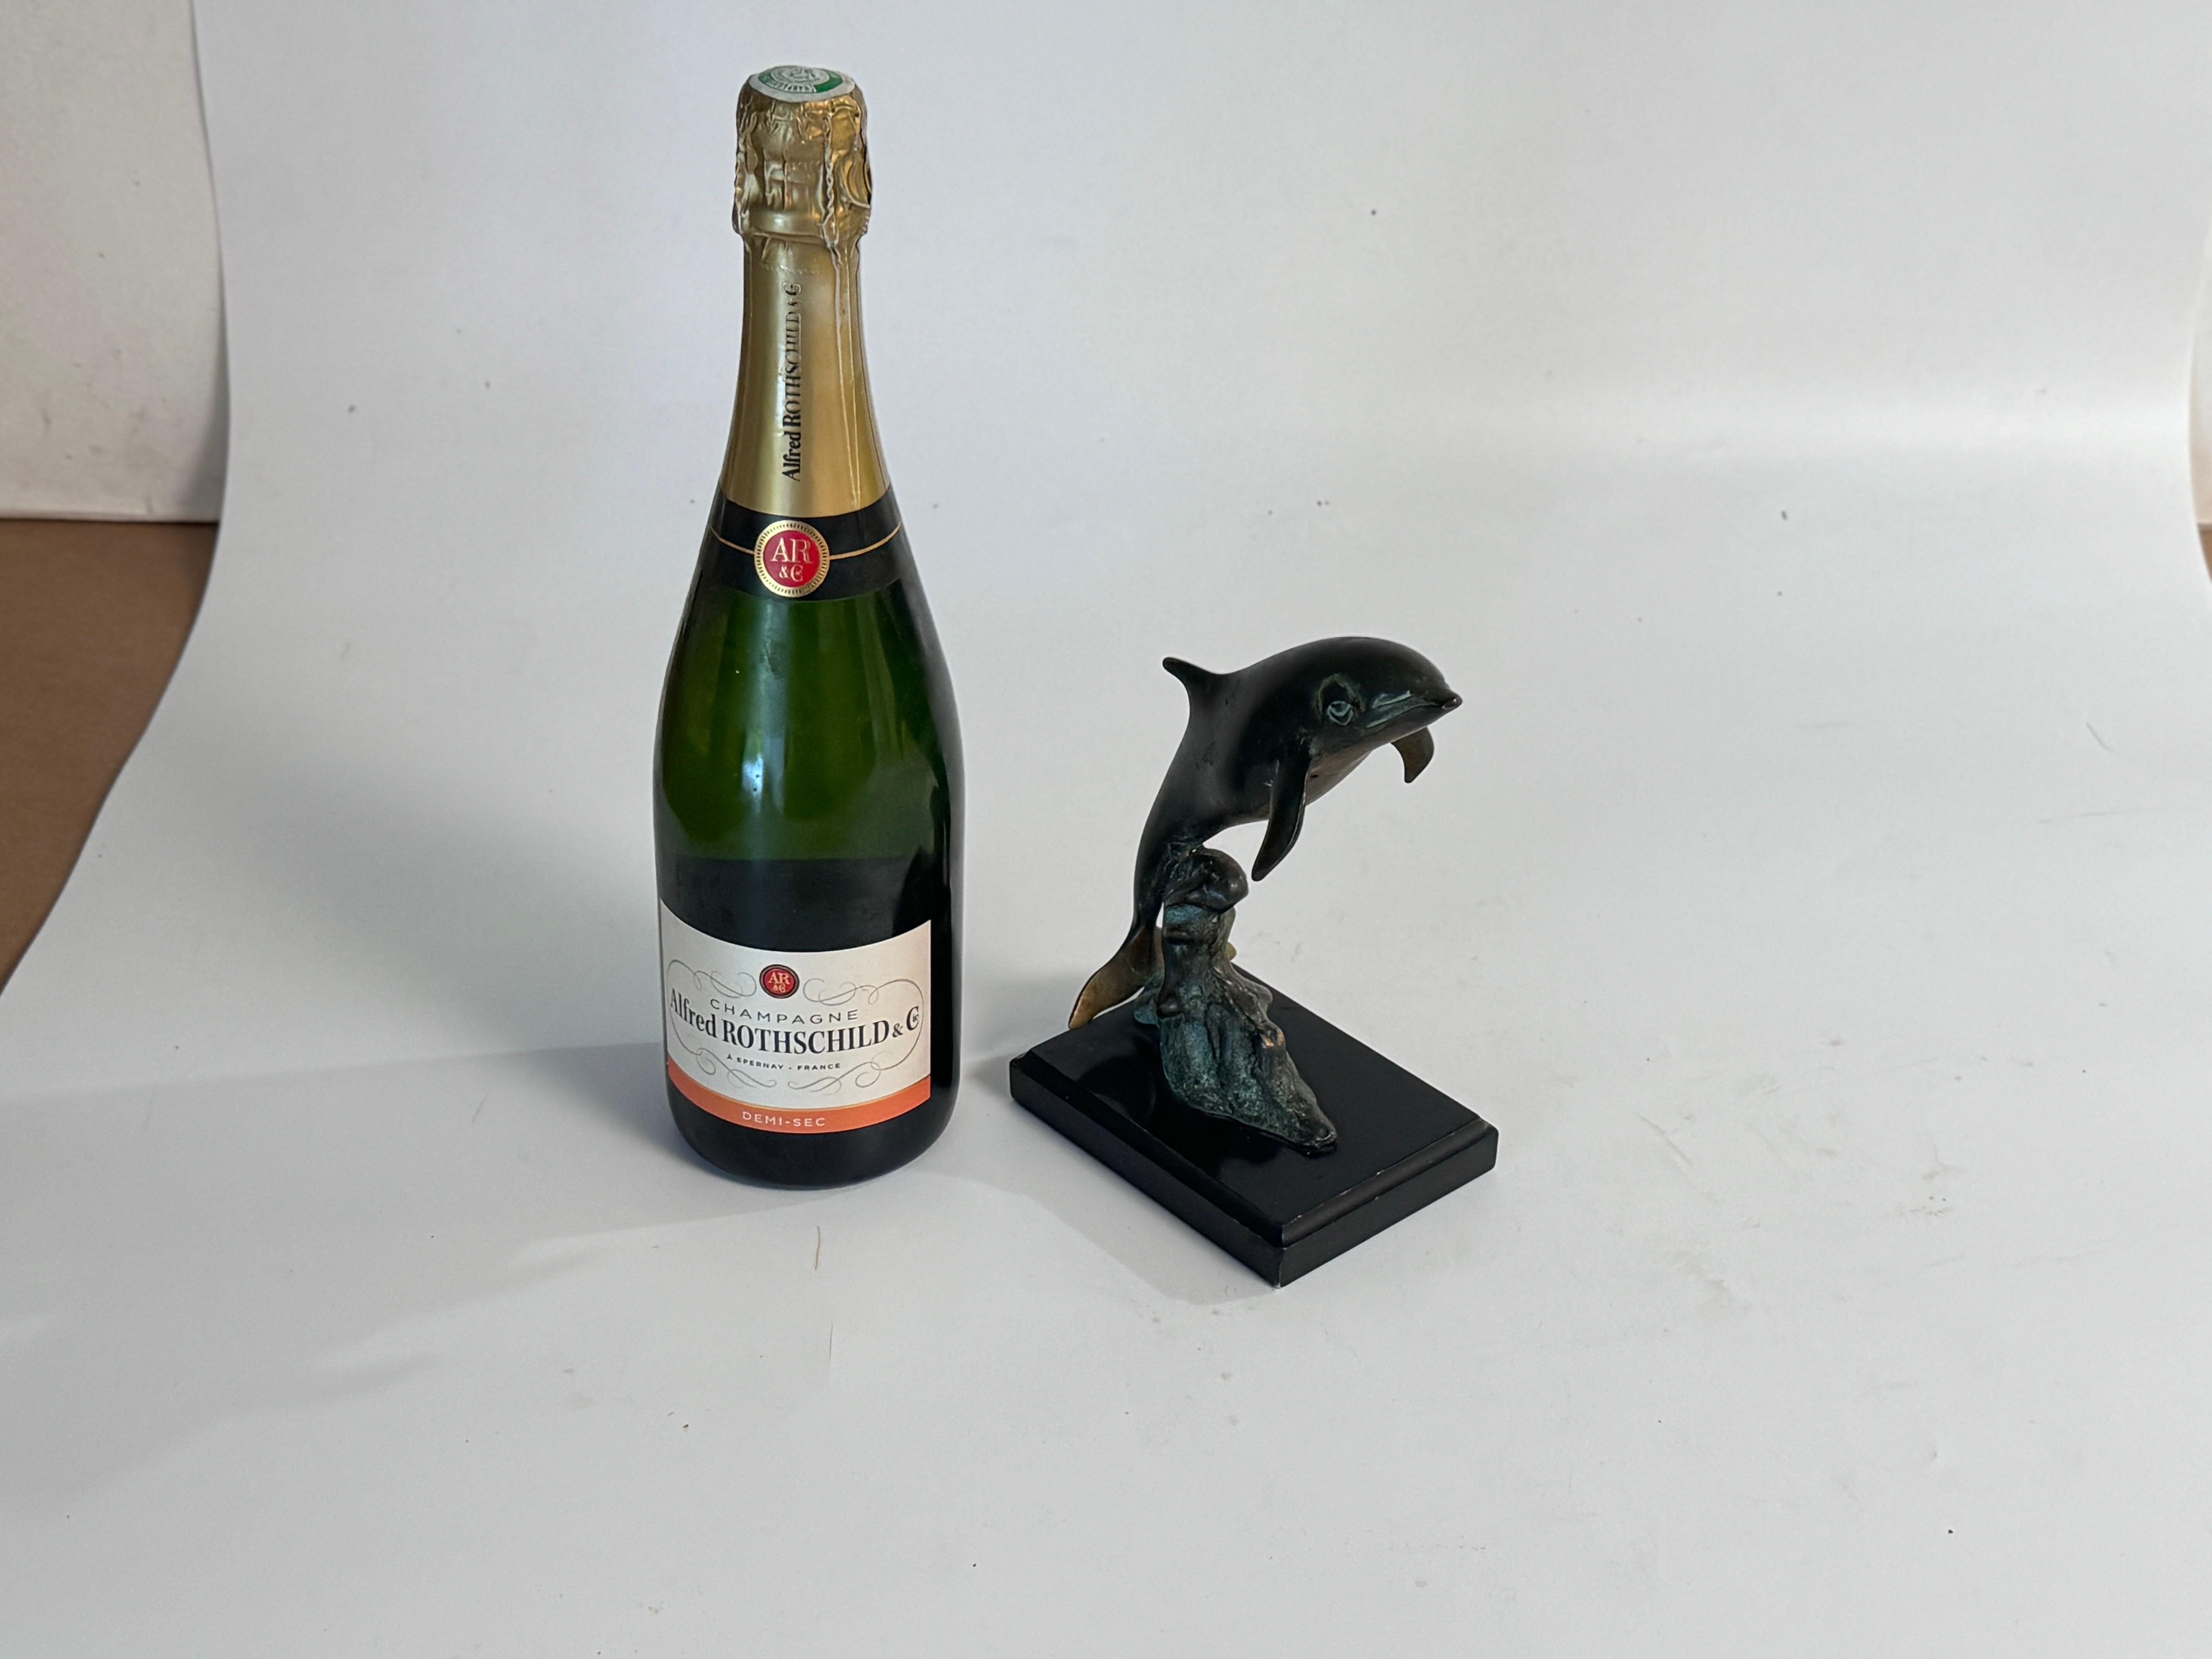 Rare and Magnificent Brutalist Bronze Dolphin Sculpture, 1970s, France
Can be used too, as a Paper Weight.